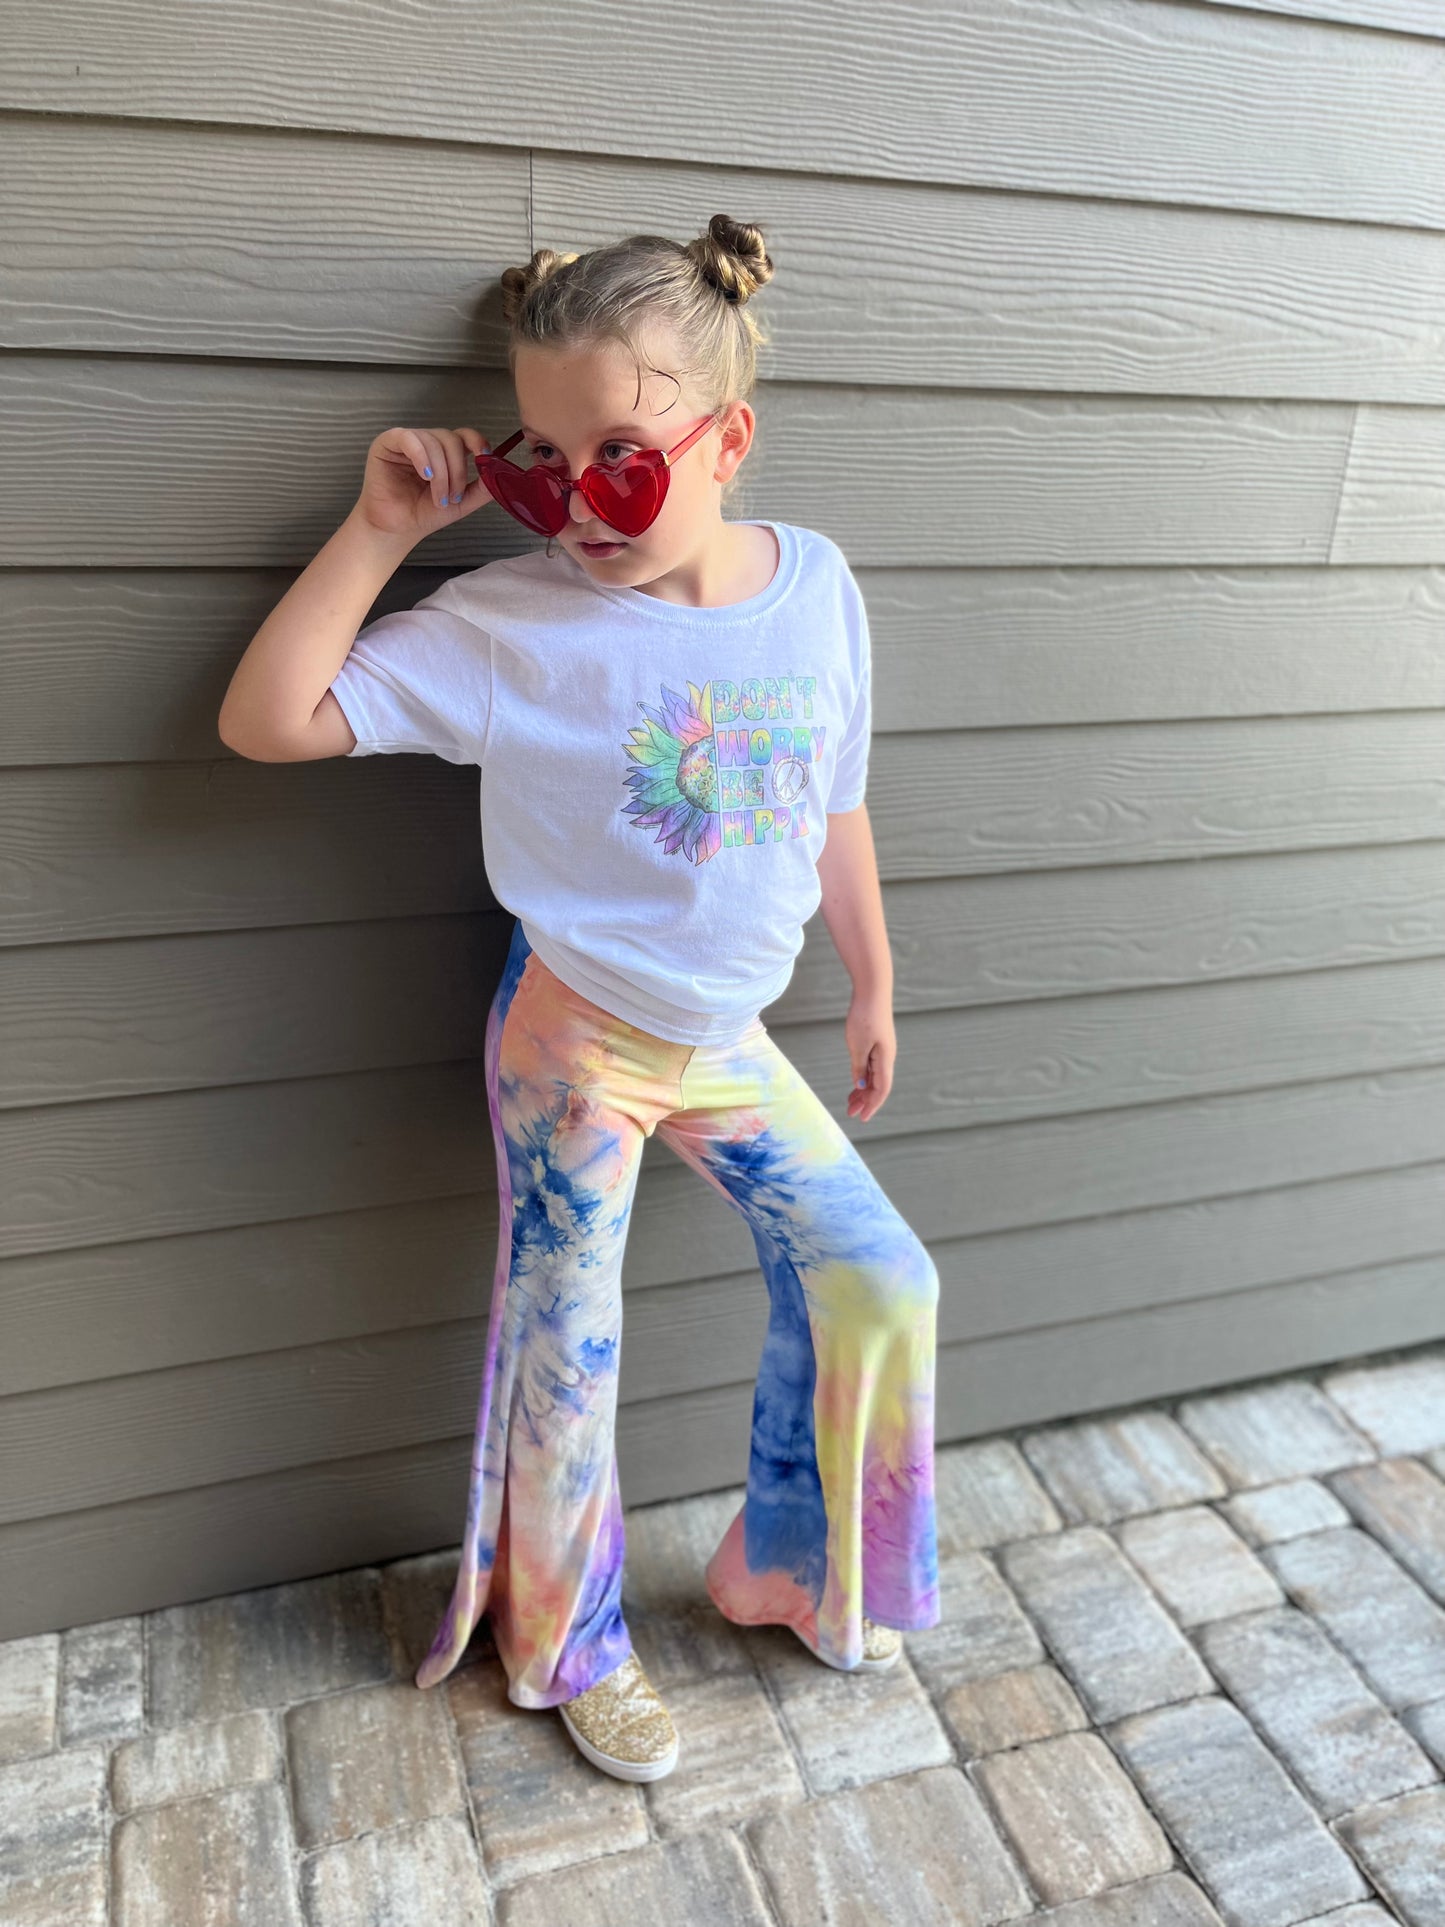 Bell Bottom Pants for Girls in Royal Blue and Multi Color Tie-Dye